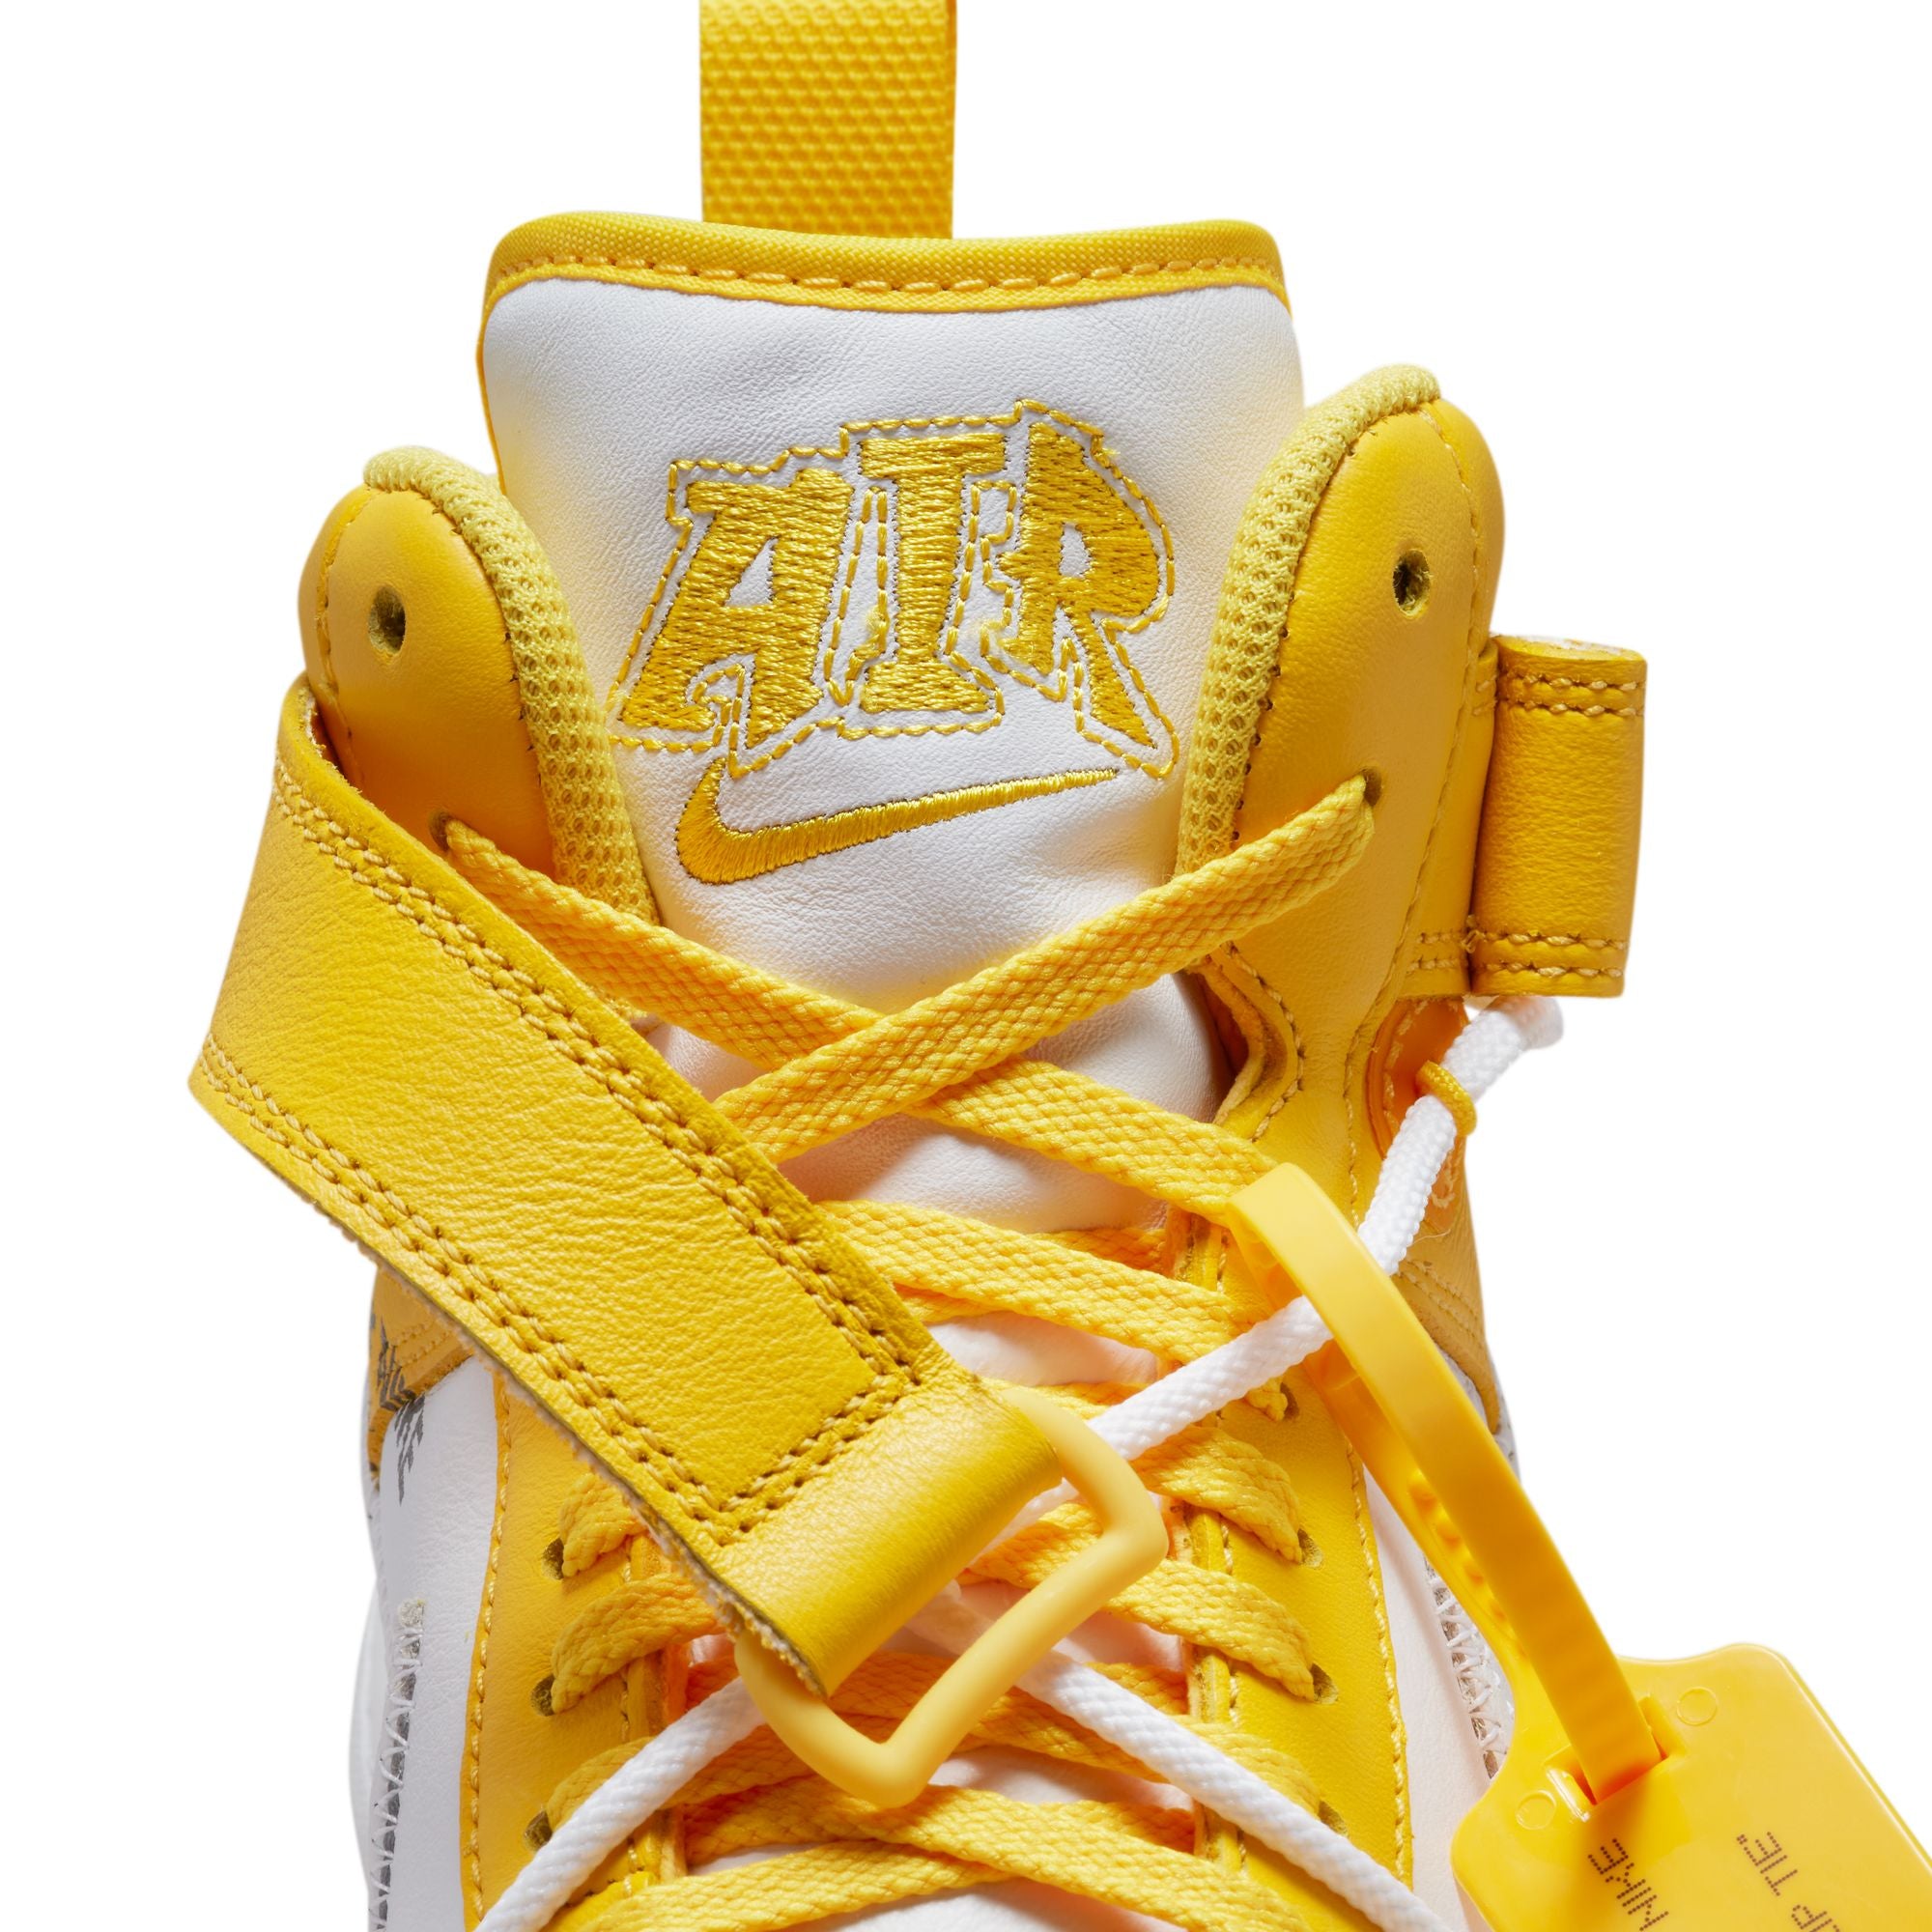 NIKE - Air Force 1 Mid Sp Lthr - (White/White-Varsity Maize) view 11